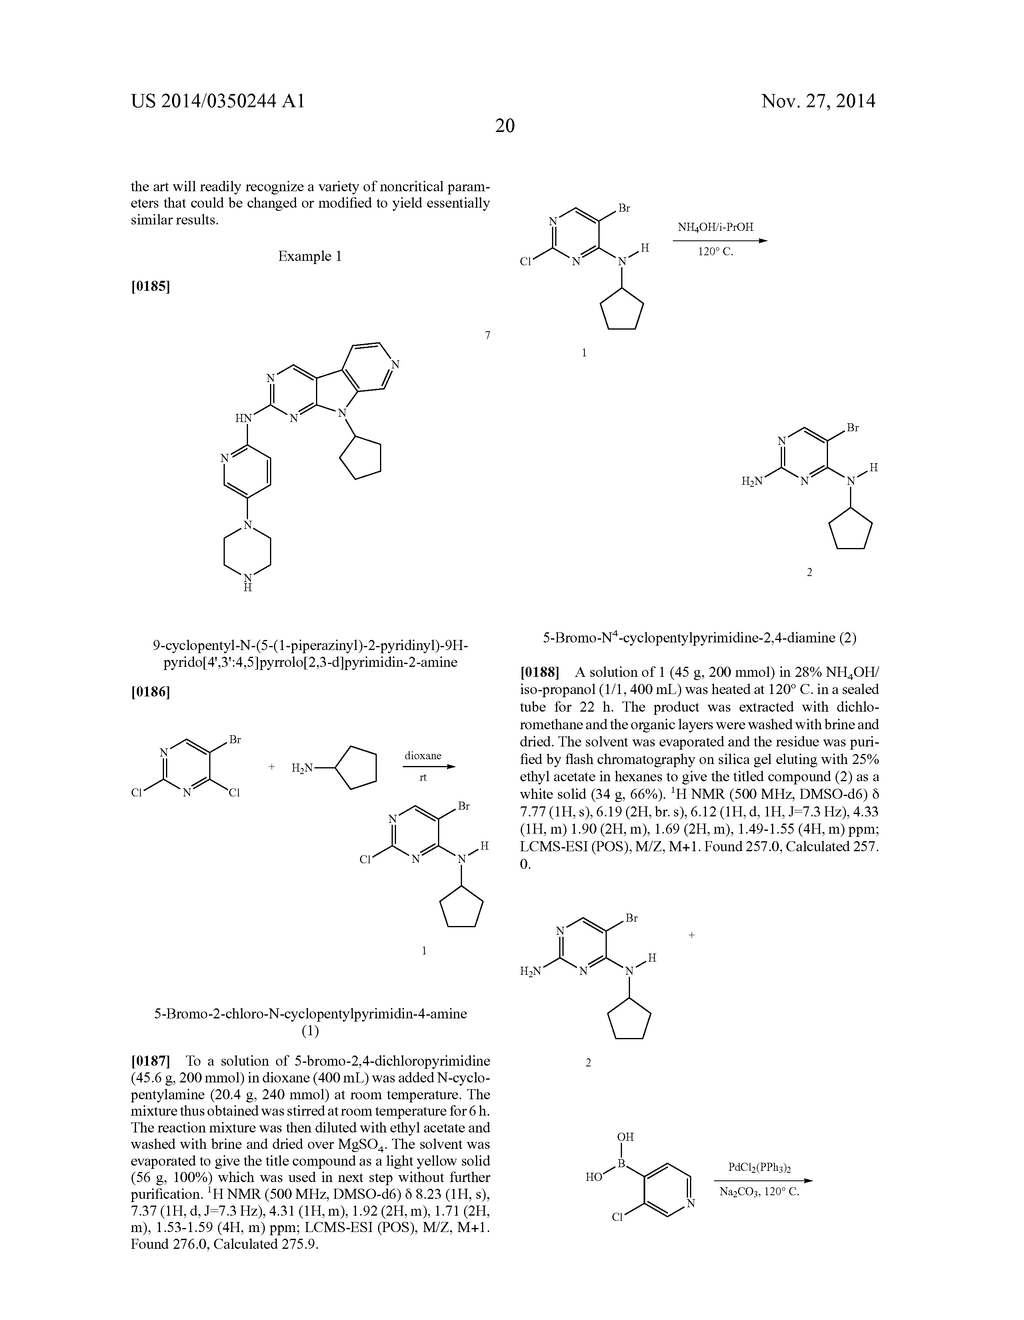 FUSED PYRIDINE, PYRIMIDINE AND TRIAZINE COMPOUNDS AS CELL CYCLE INHIBITORS - diagram, schematic, and image 21